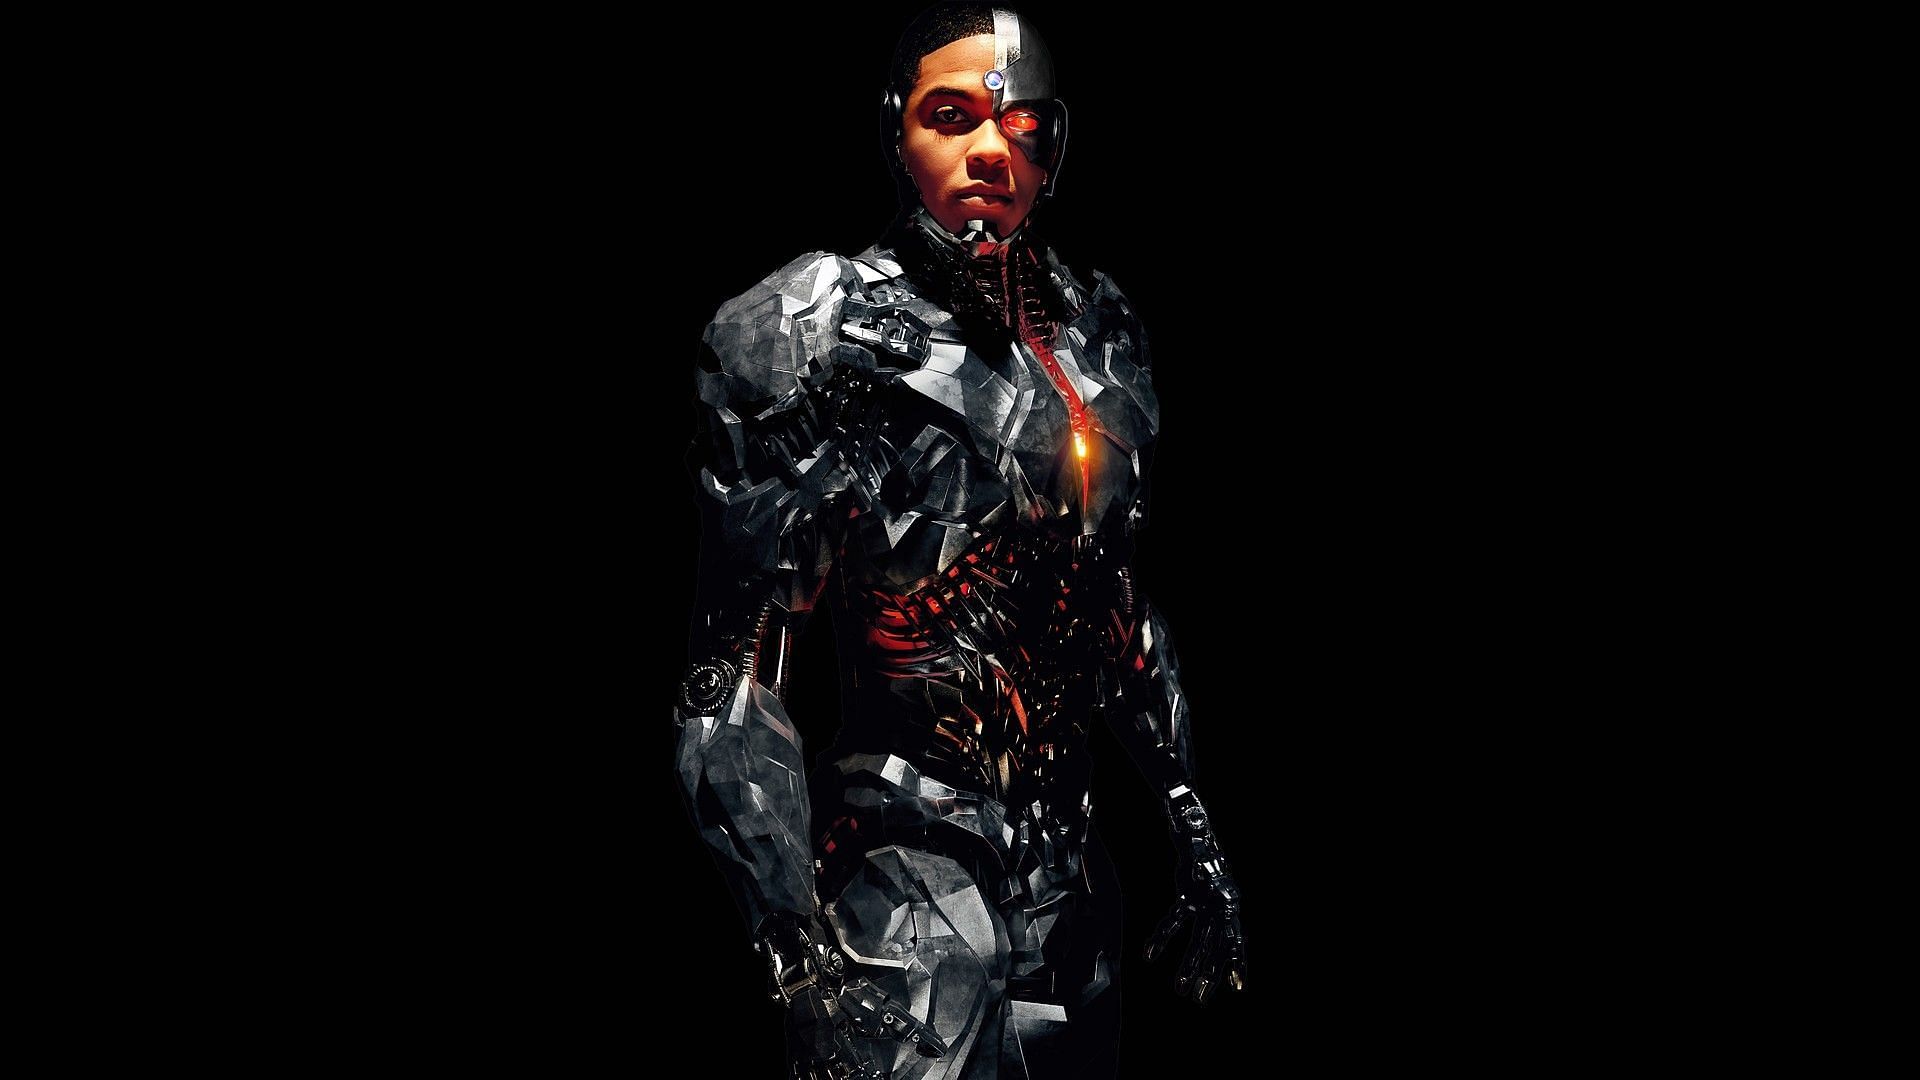 Cyborg has appeared in Justice League and Batman vs Superman. (Image via DC)